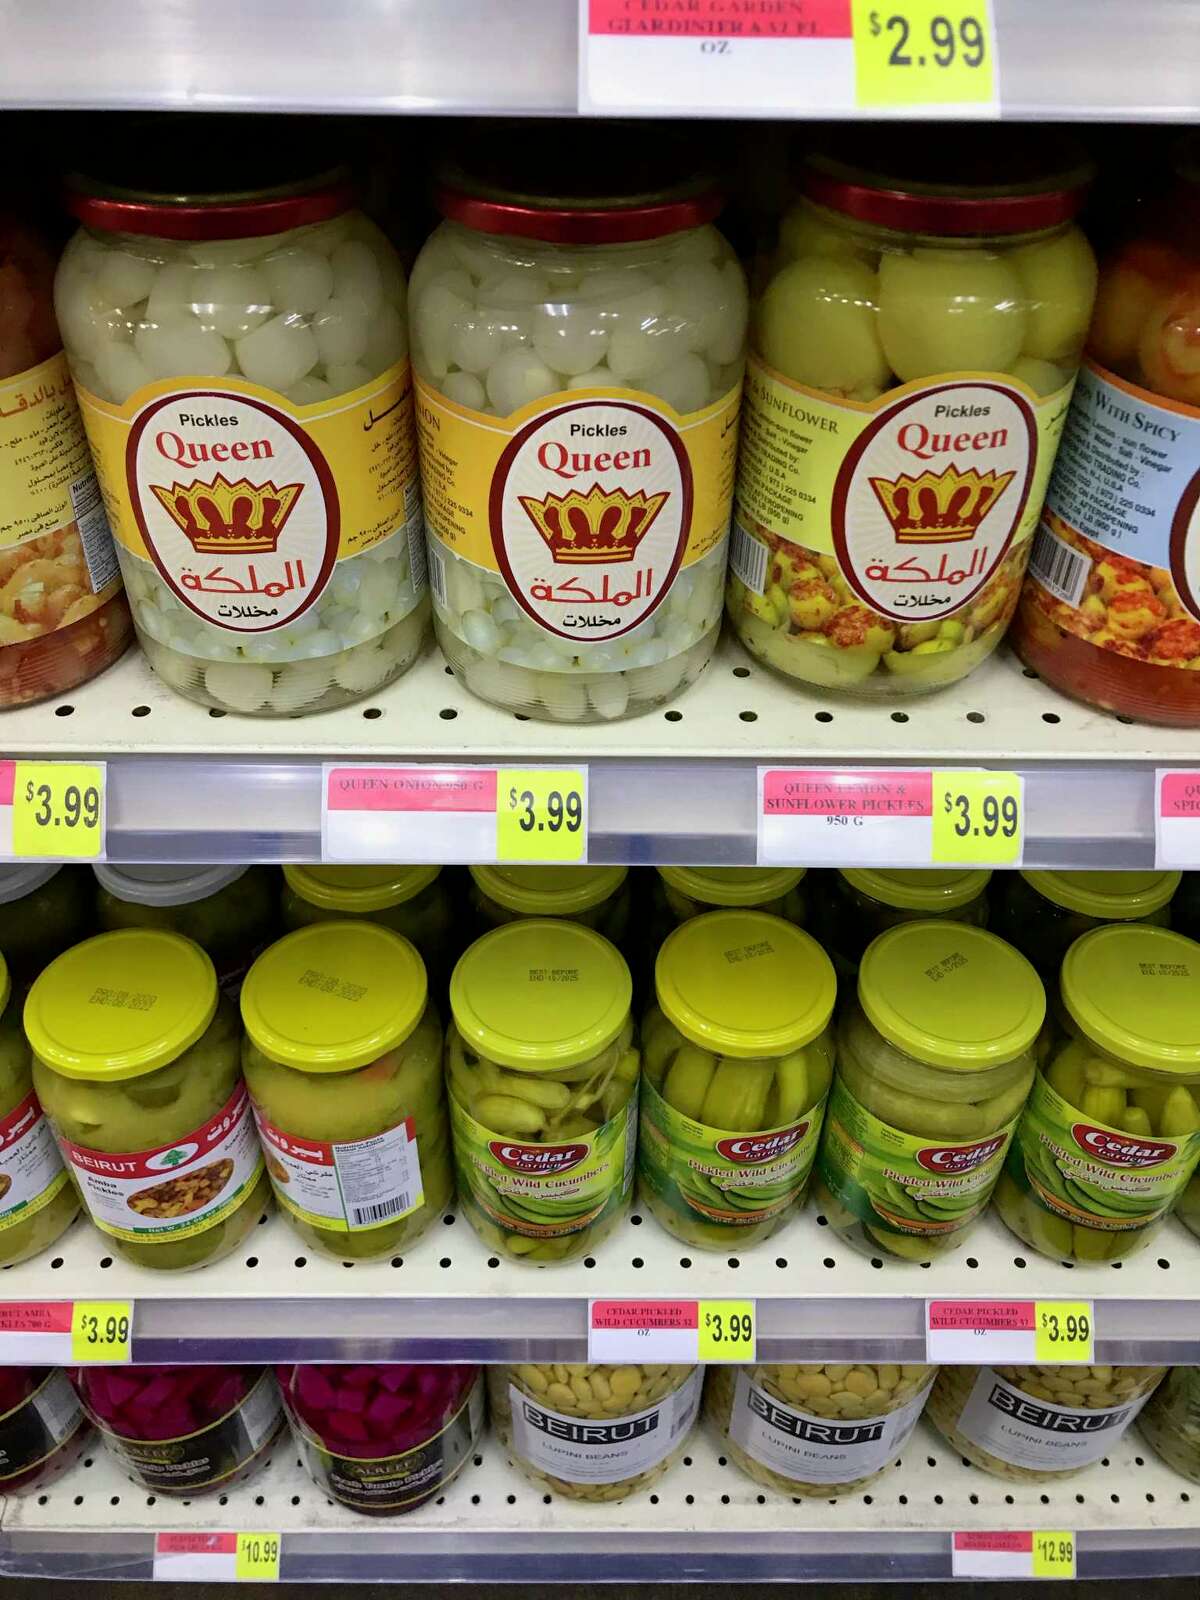 Ali Baba International Food Market stocks a wide range of Middle Eastern and Indian pickles.